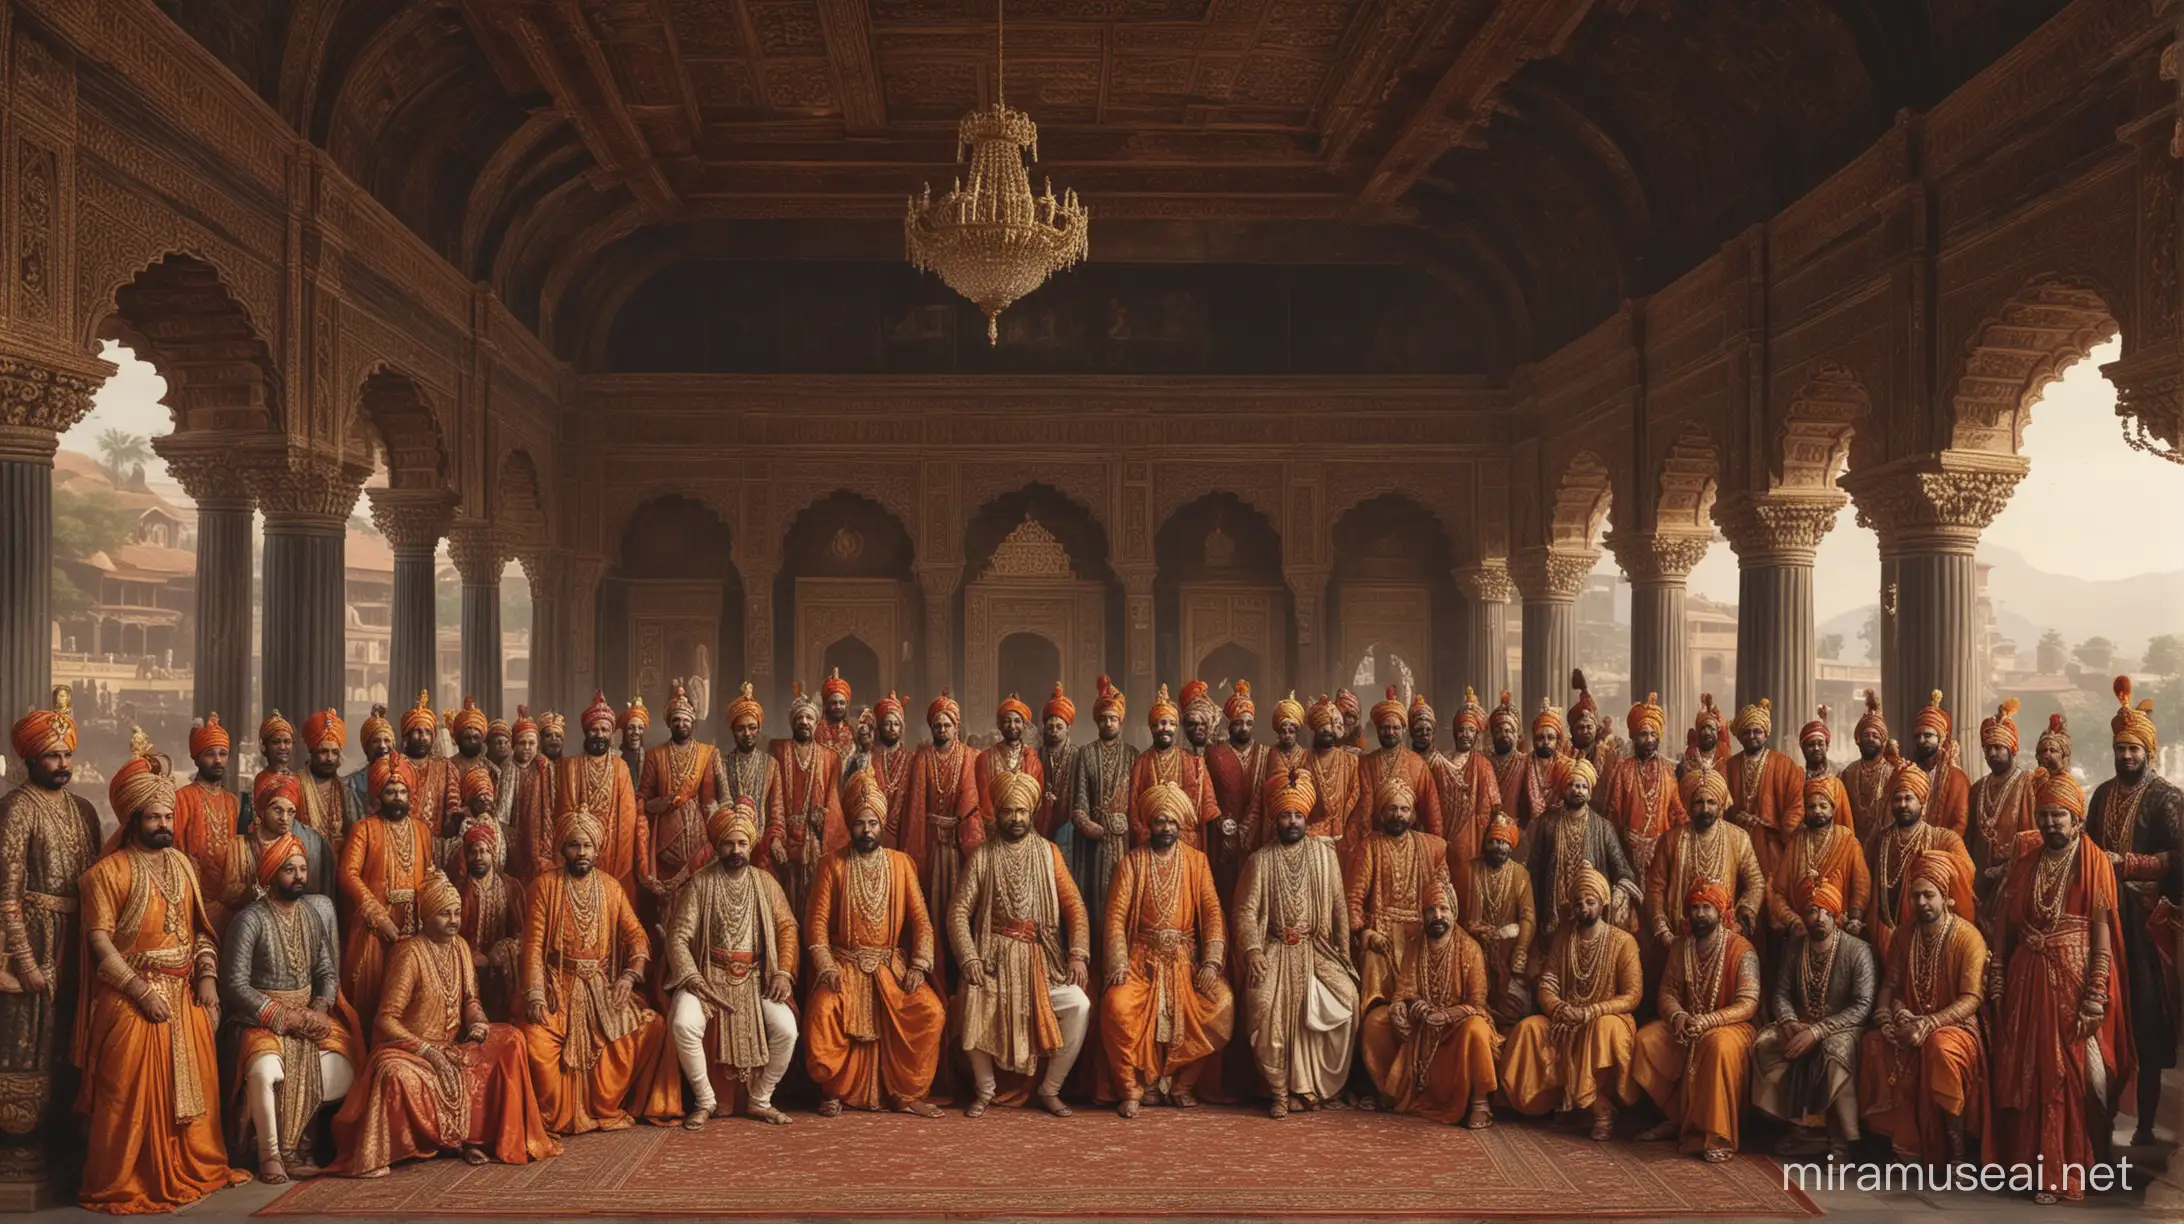 Create an image of many 17th century Maratha Durbar without people
